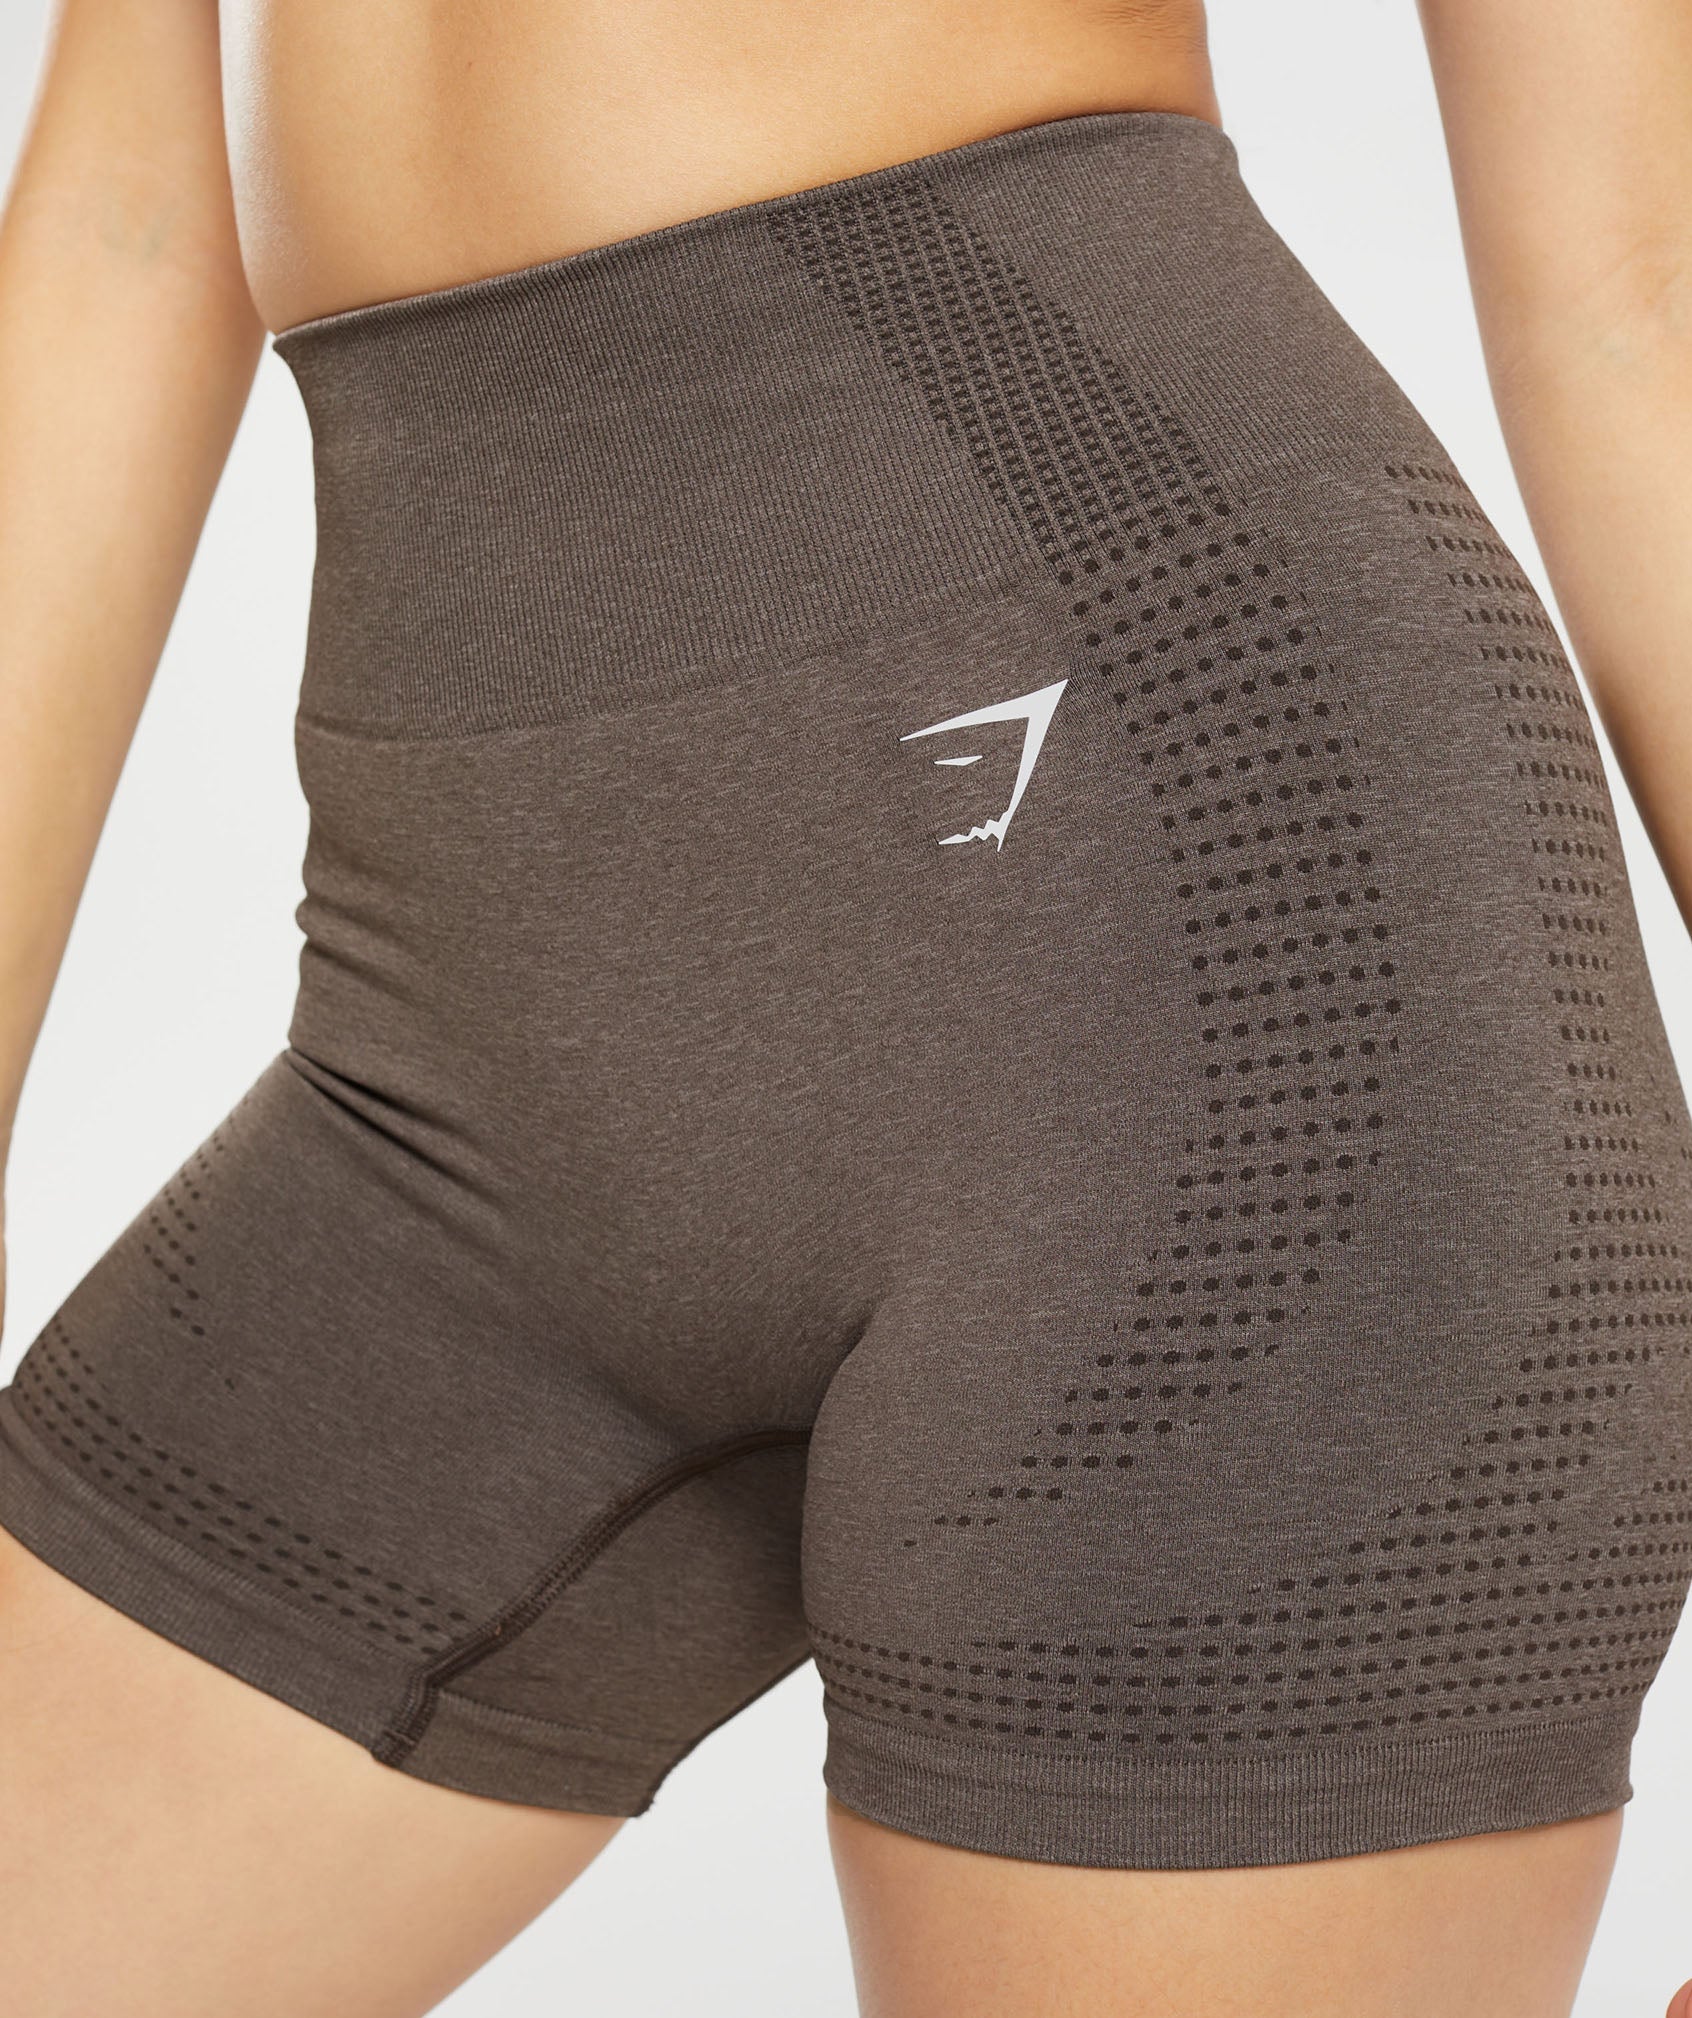 Vital Seamless 2.0 Shorts in Brown Marl - view 5